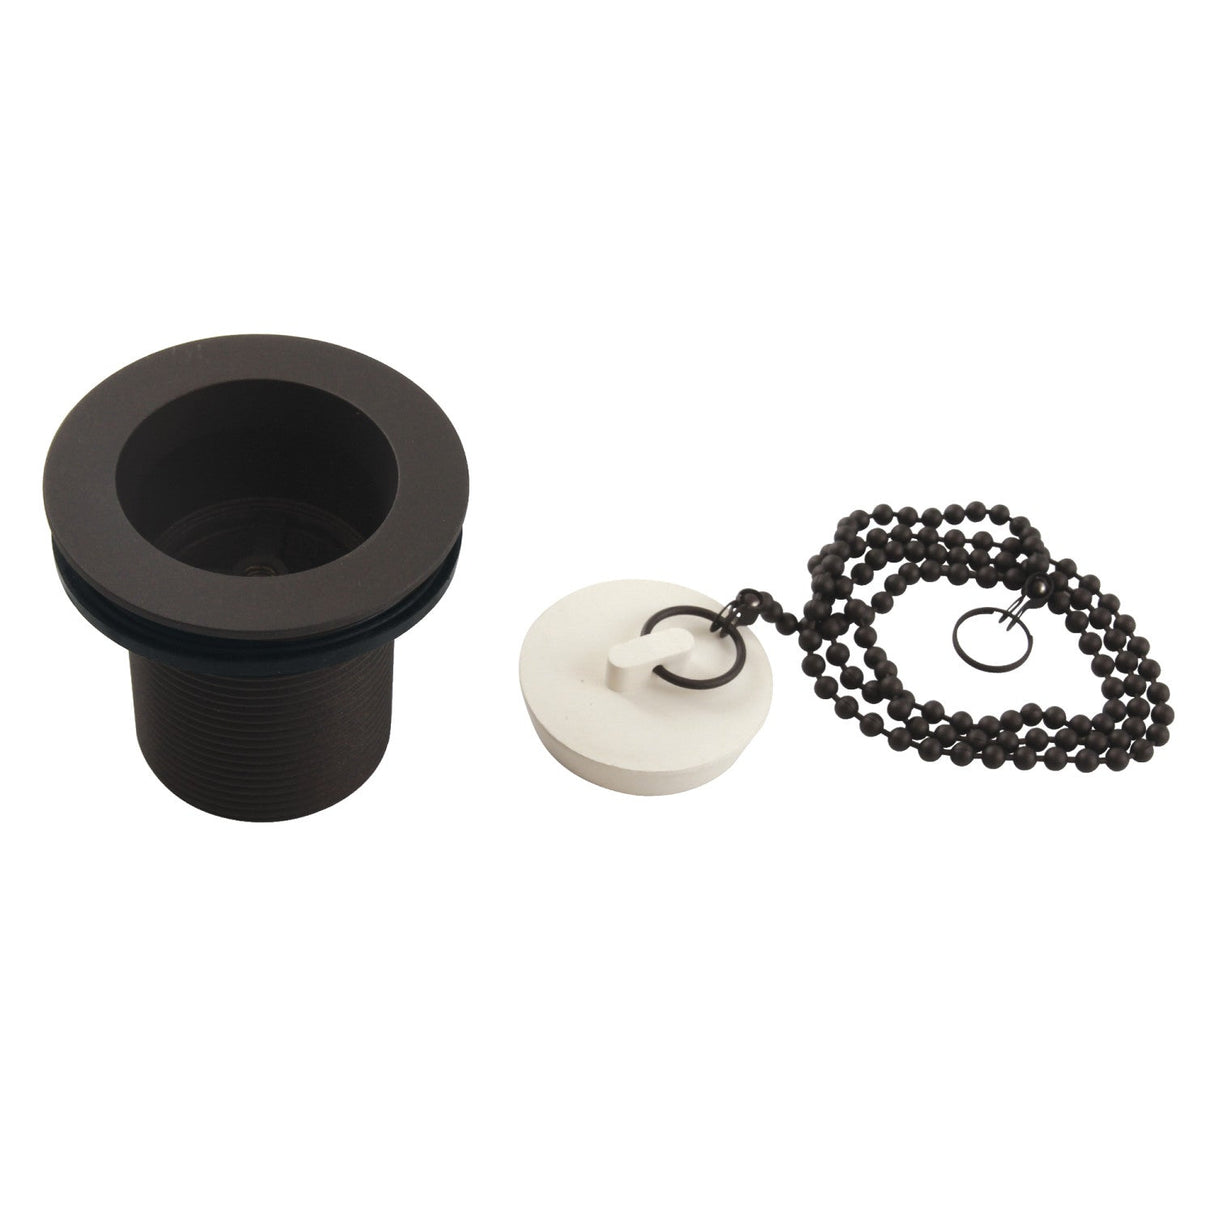 Made To Match DSP20ORB 1-1/2-Inch Chain and Stopper Tub Drain with 2-Inch Body Thread, Oil Rubbed Bronze